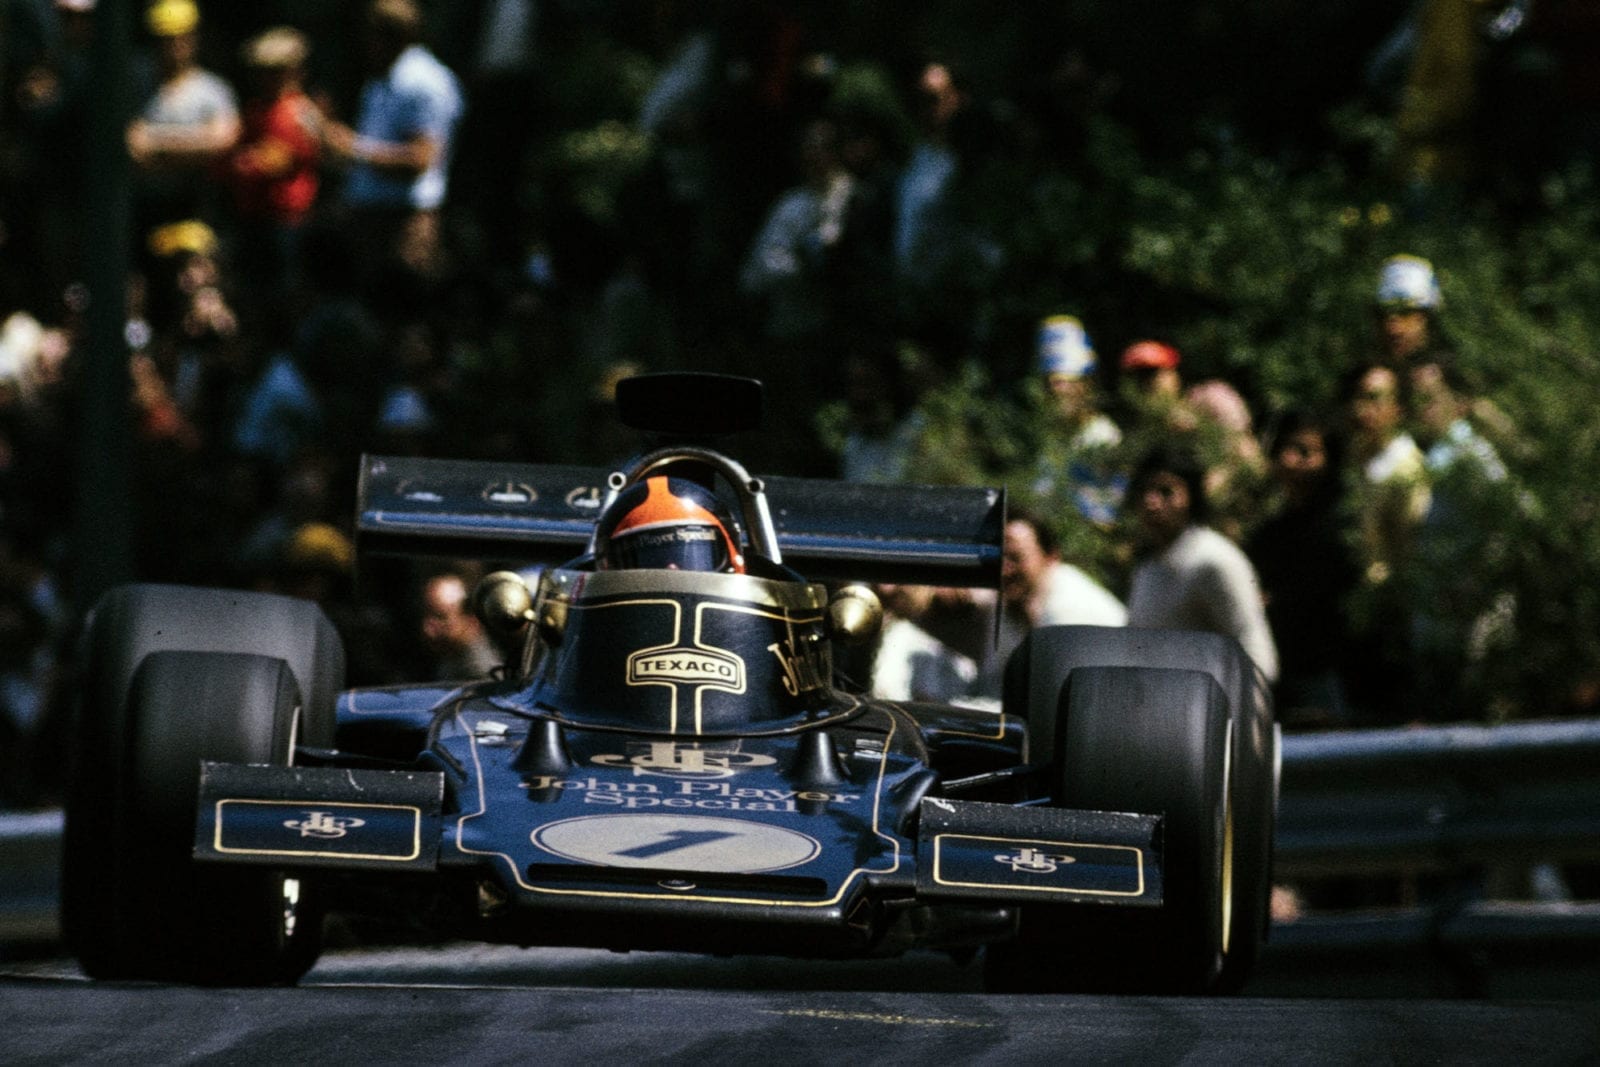 Emmerson Fittipaldi pushing in his Lotus at the 1973 Spanish Grand Prix.